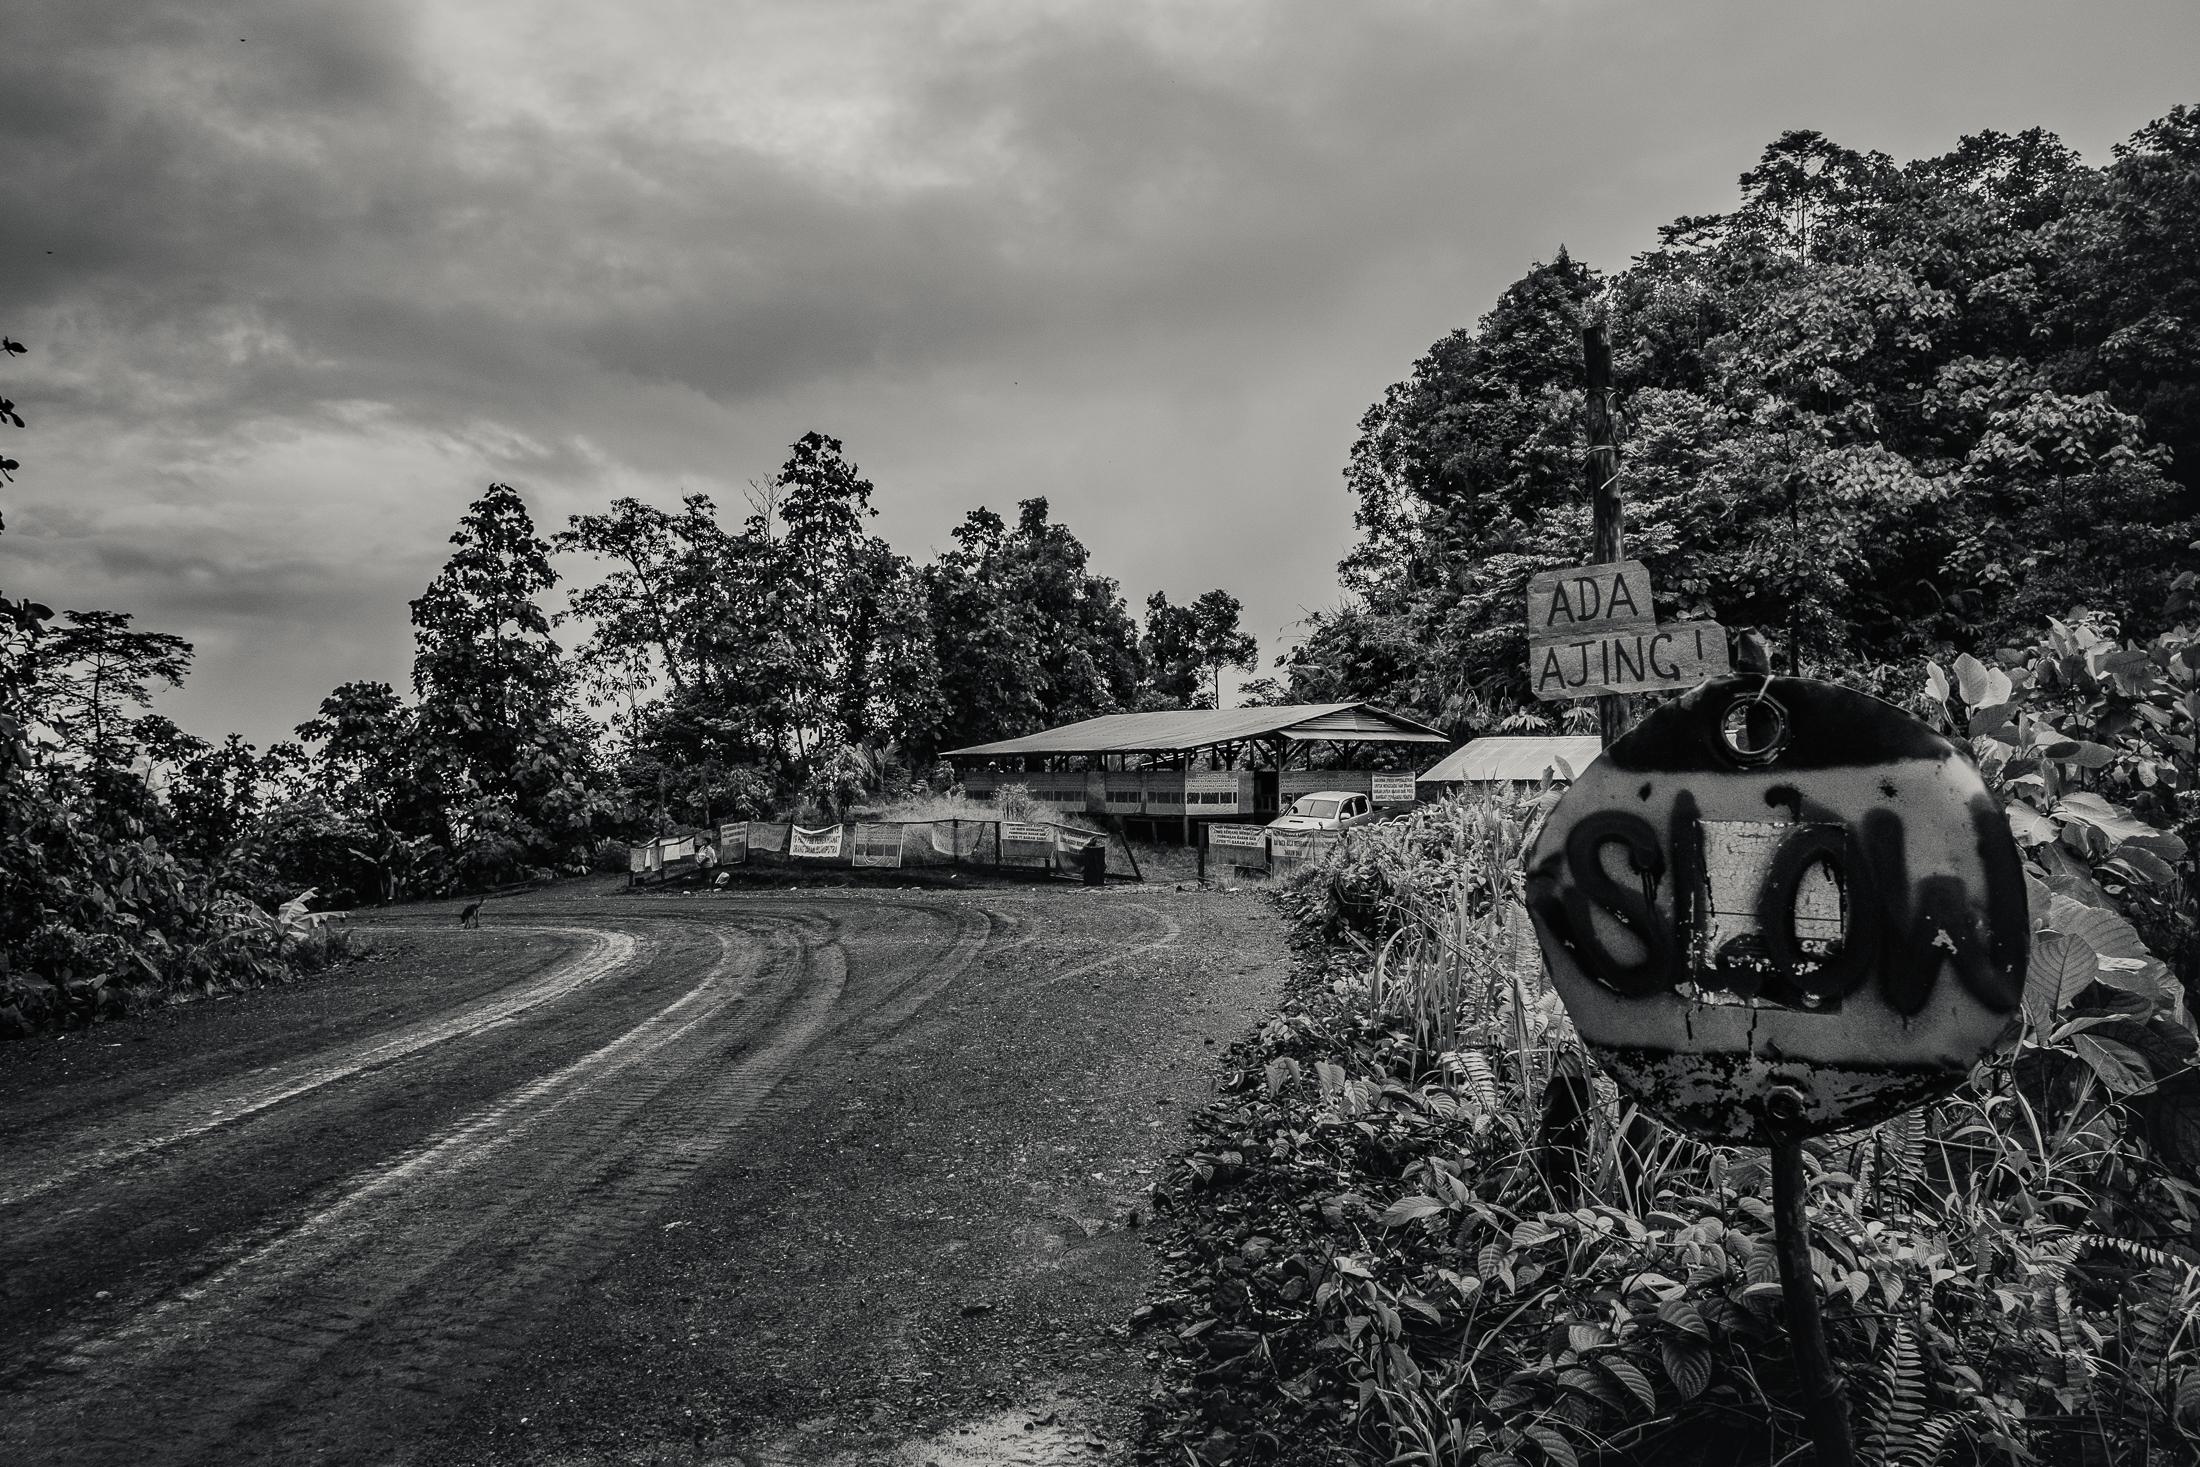 Indigenous Land Rights in Sarawak -  'Kilometre 15' - a protest site and blockade...